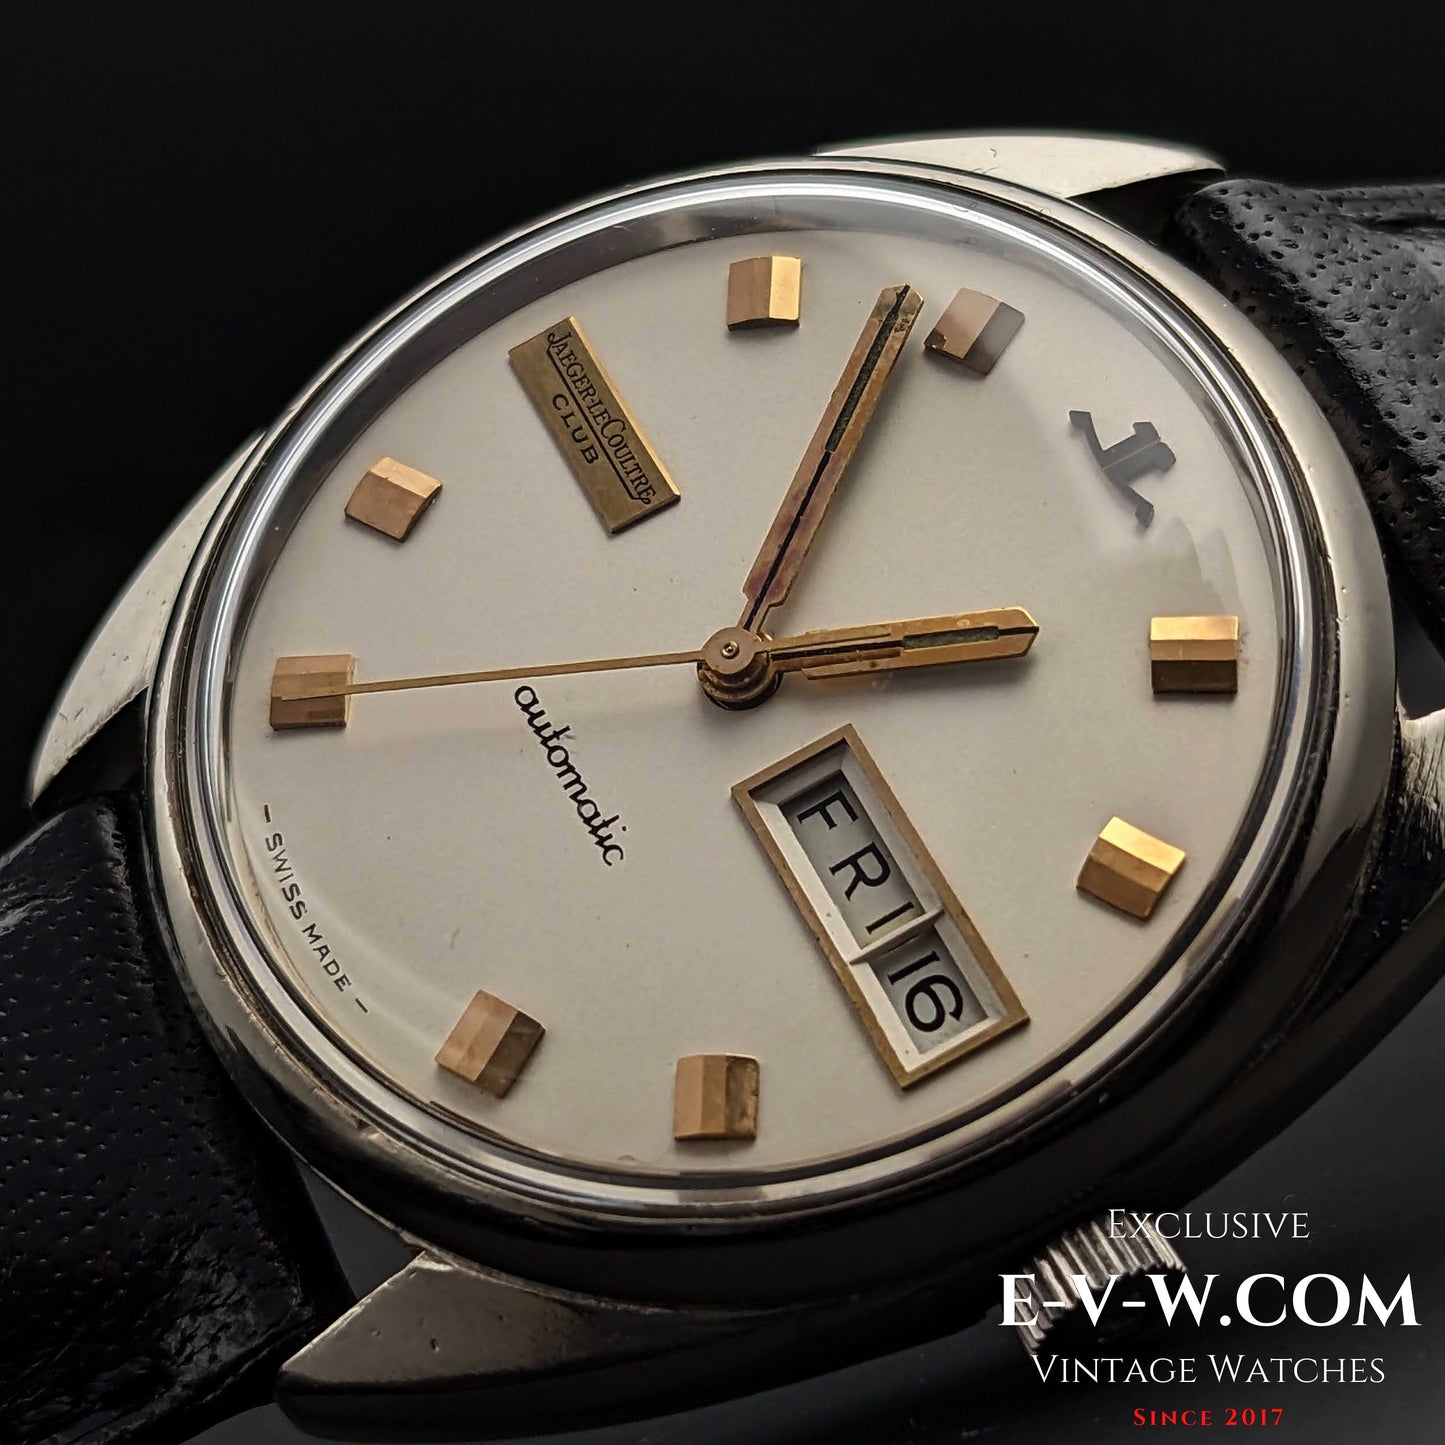 Jaeger-LeCoultre CLUB Day-Date / Automatic - Cal. AS 1906 / Ref. E300706 - Vintage 1970s